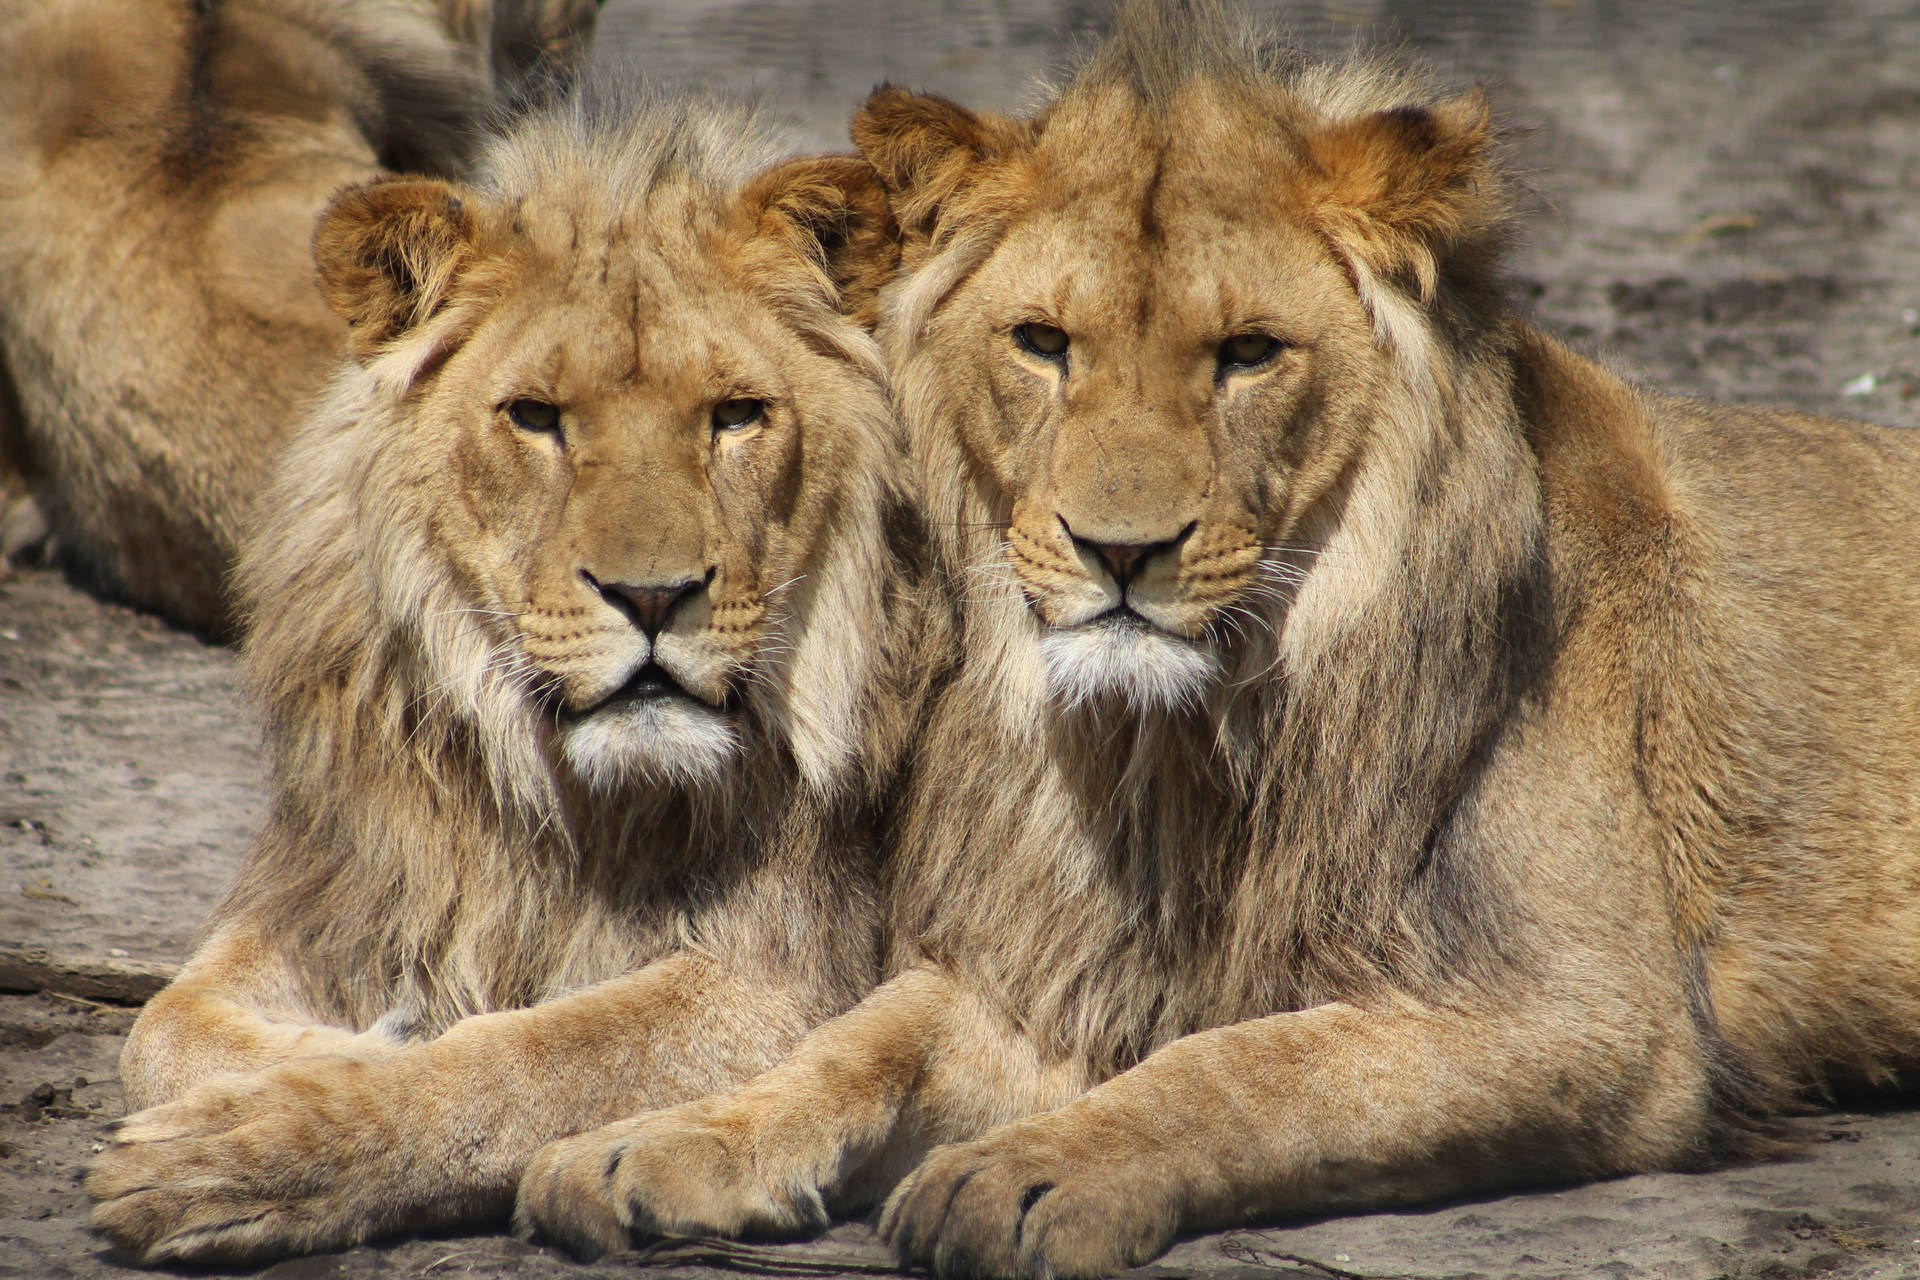 Two Lion Predators peacefully at rest Wallpaper